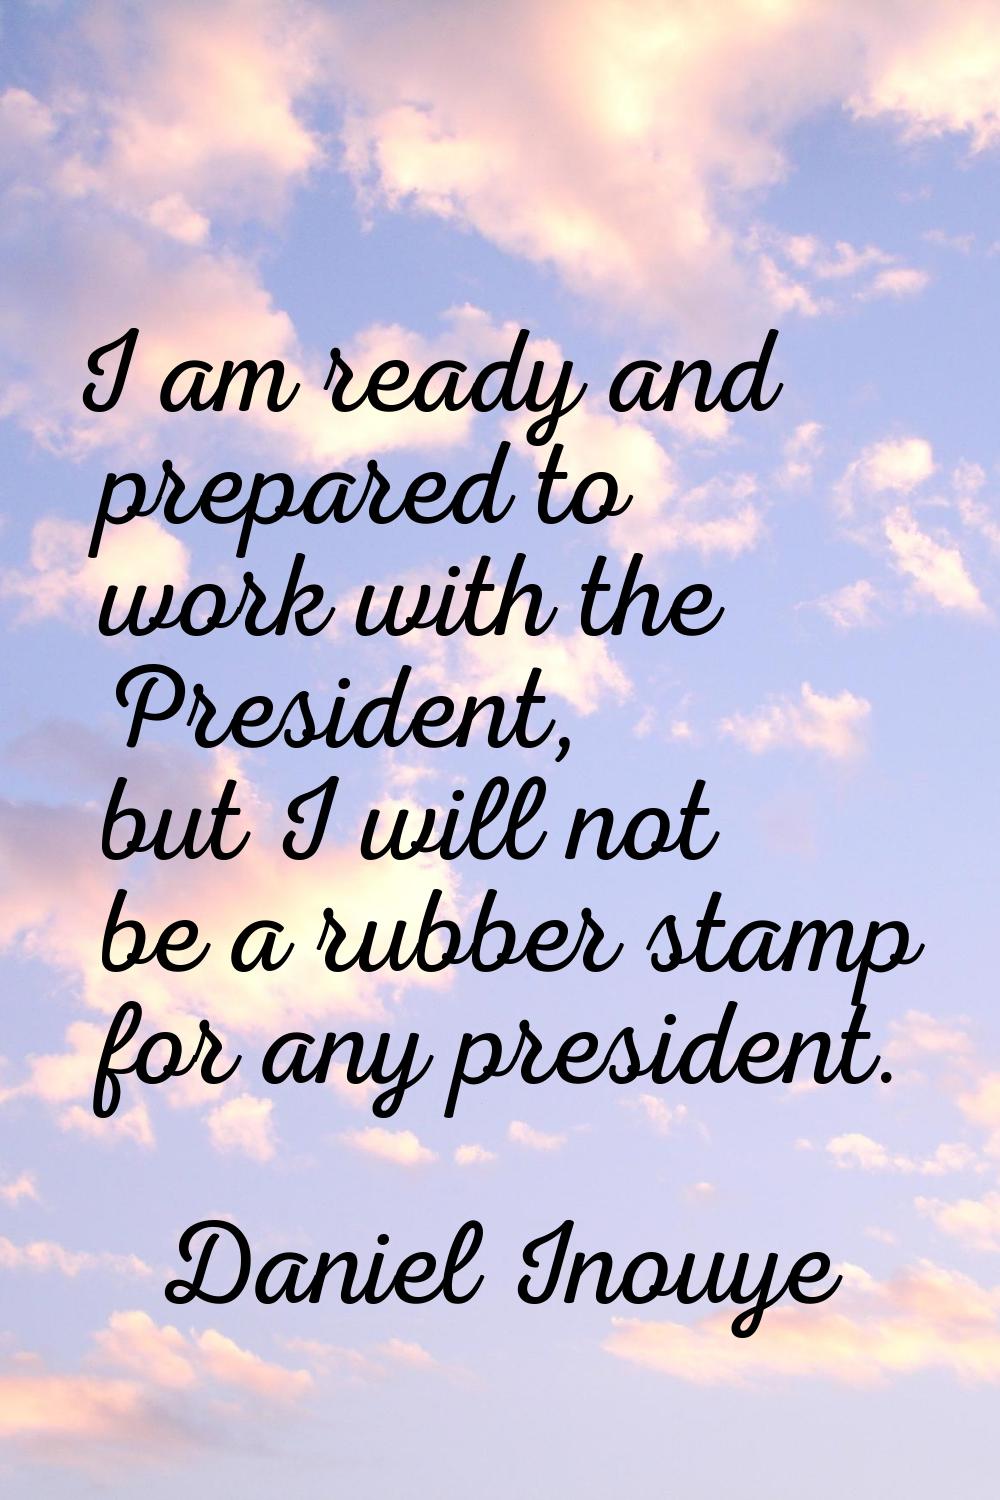 I am ready and prepared to work with the President, but I will not be a rubber stamp for any presid